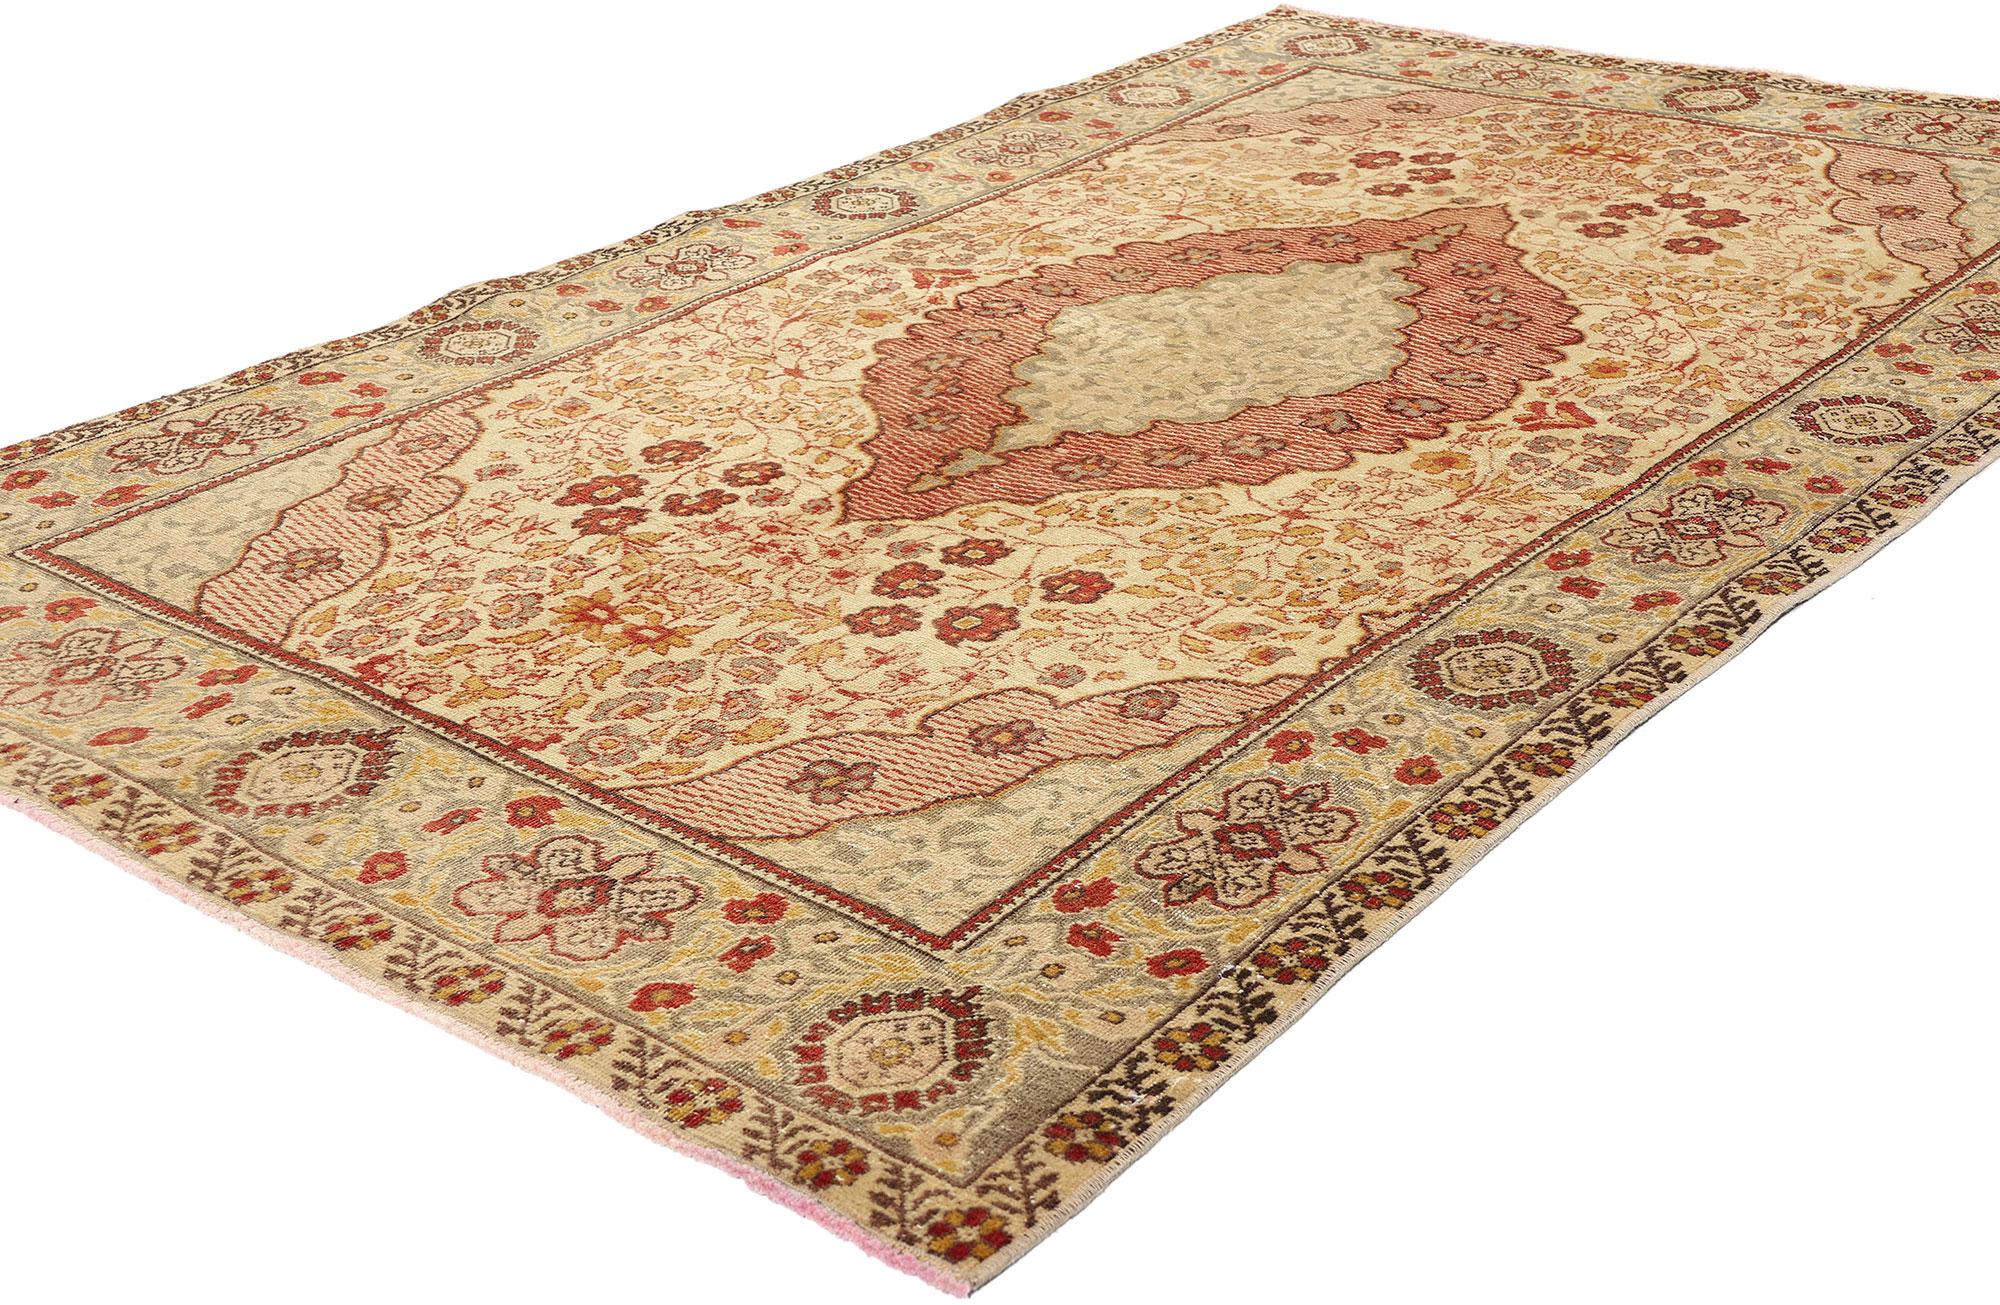 52072 Vintage Turkish Oushak Rug, 04'03 x 07'00. Turkish Oushak rugs, originating from the storied rug-making heart of Oushak in western Turkey, that are slightly distressed feature intentionally or naturally worn areas, giving them a distinctive